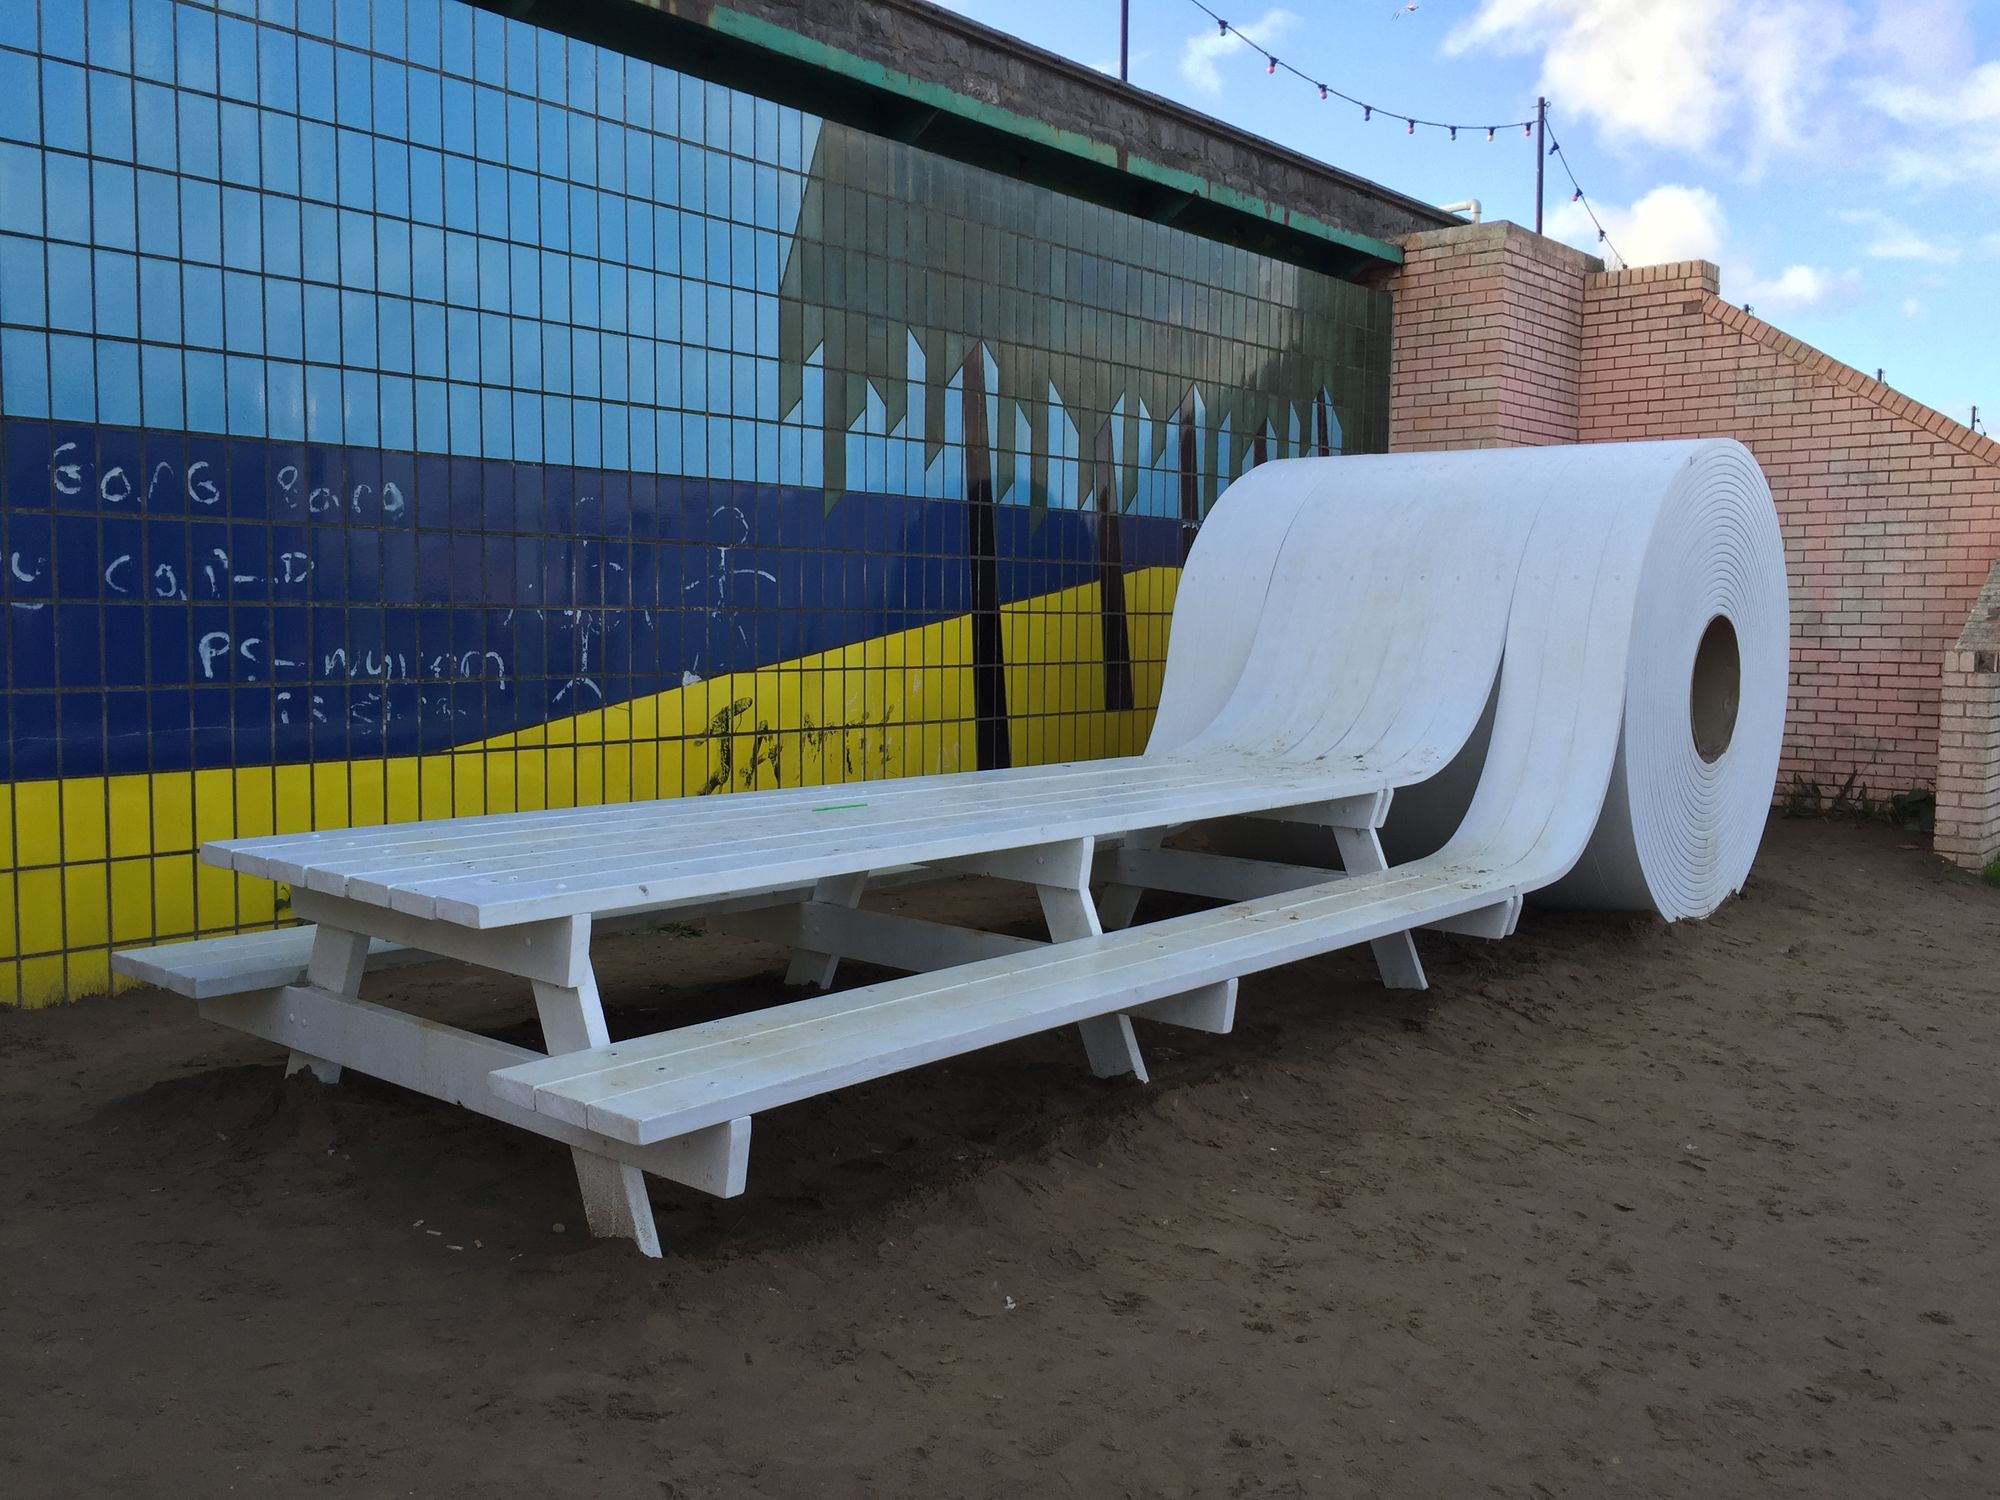 A picnic bench which turns into a roll of toilet paper